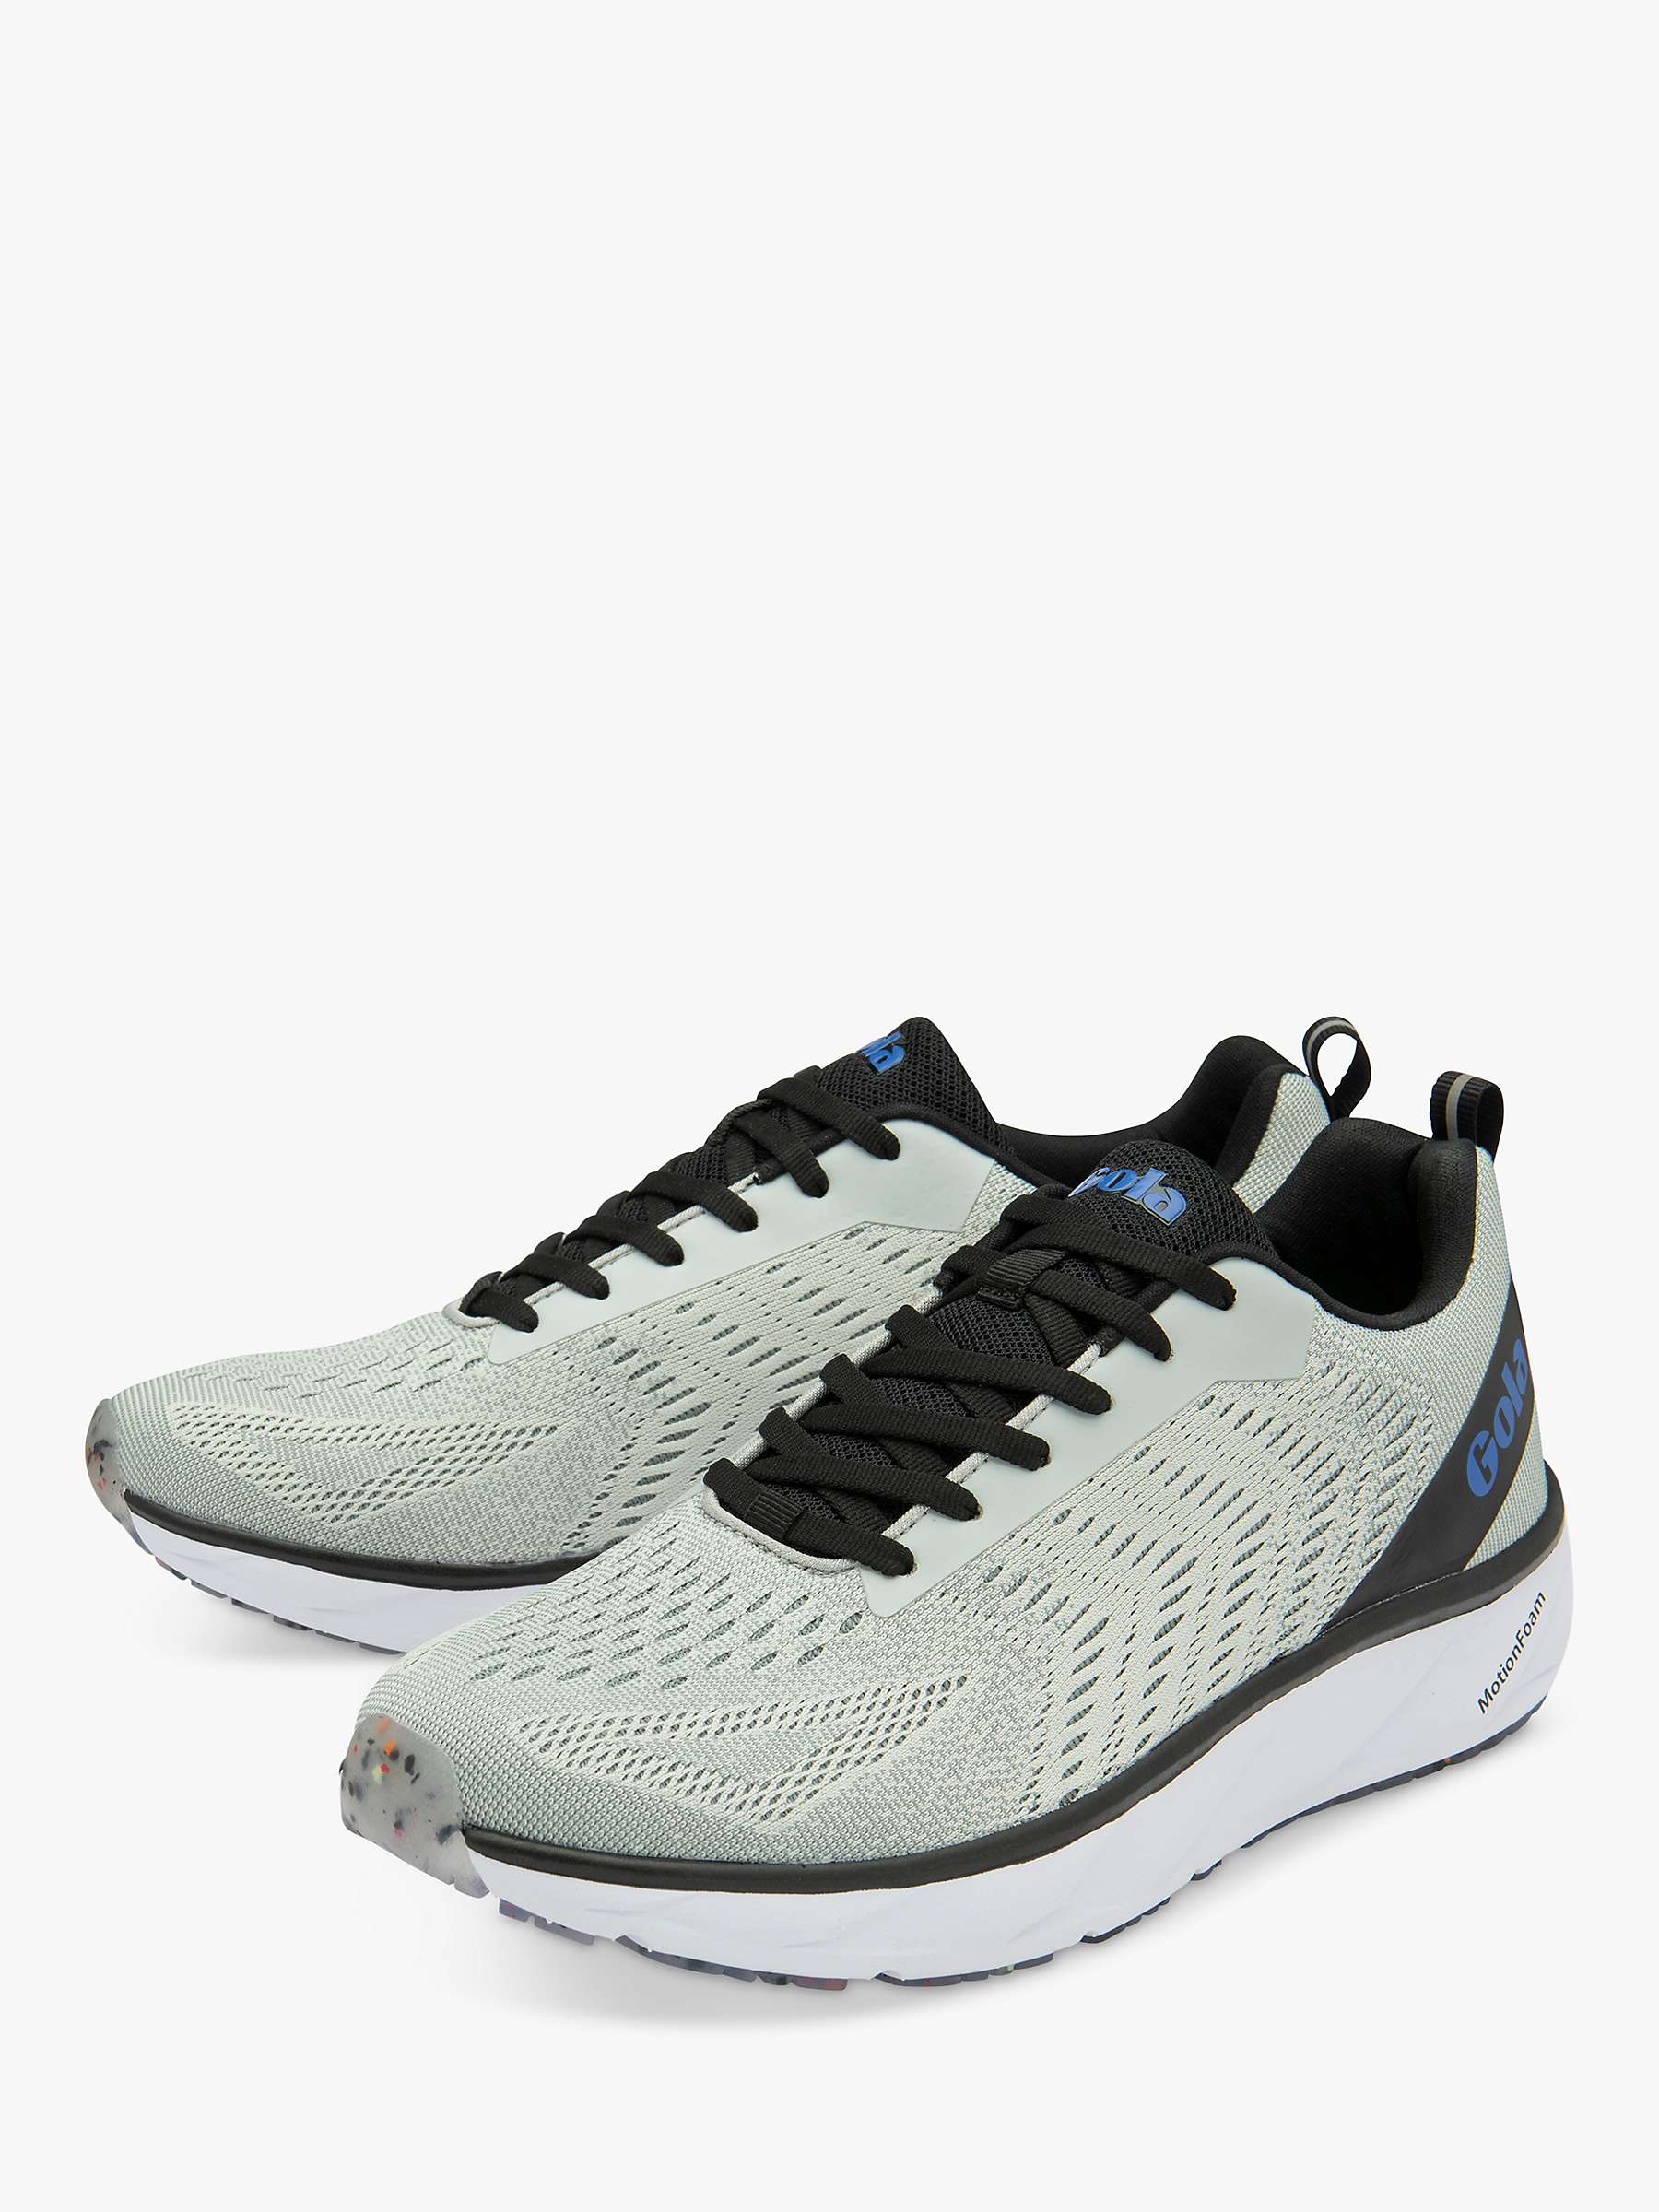 Buy Gola Performance Ultra Speed 2 Running Trainers, Grey/Black/Pro Blue Online at johnlewis.com